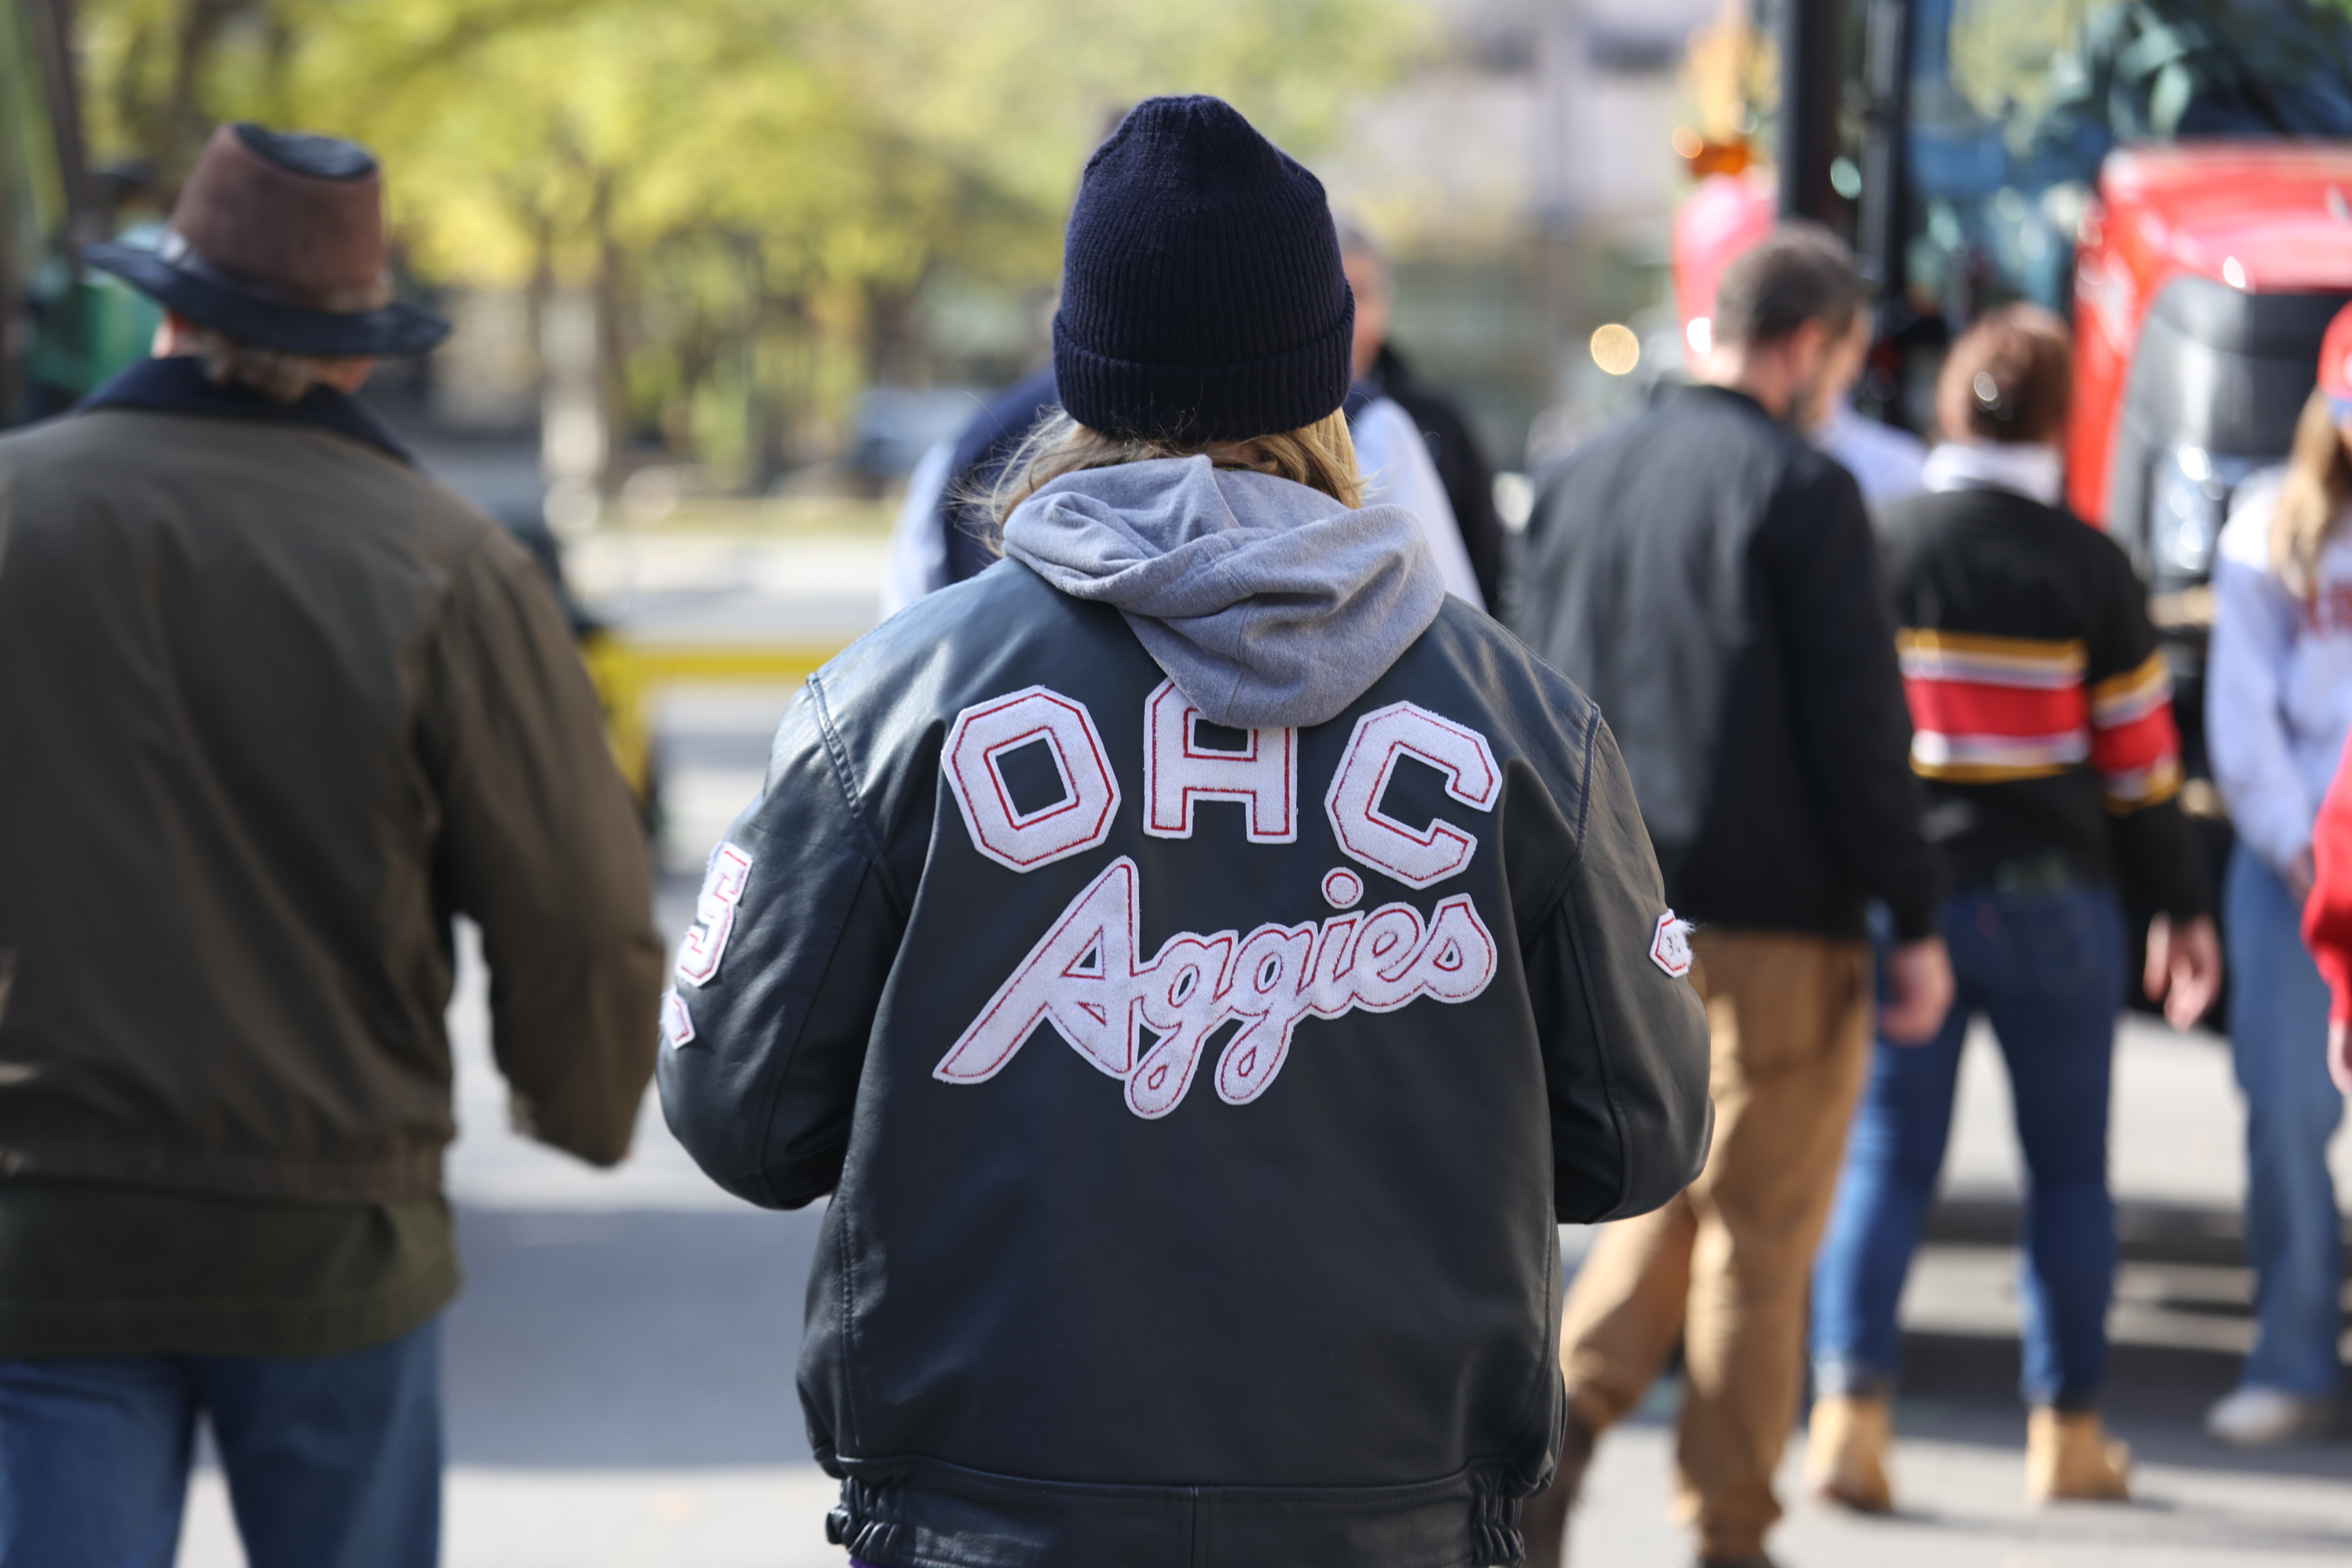 Back shot of person wearing OAC leather jacket, with "OAC Aggies" lettering